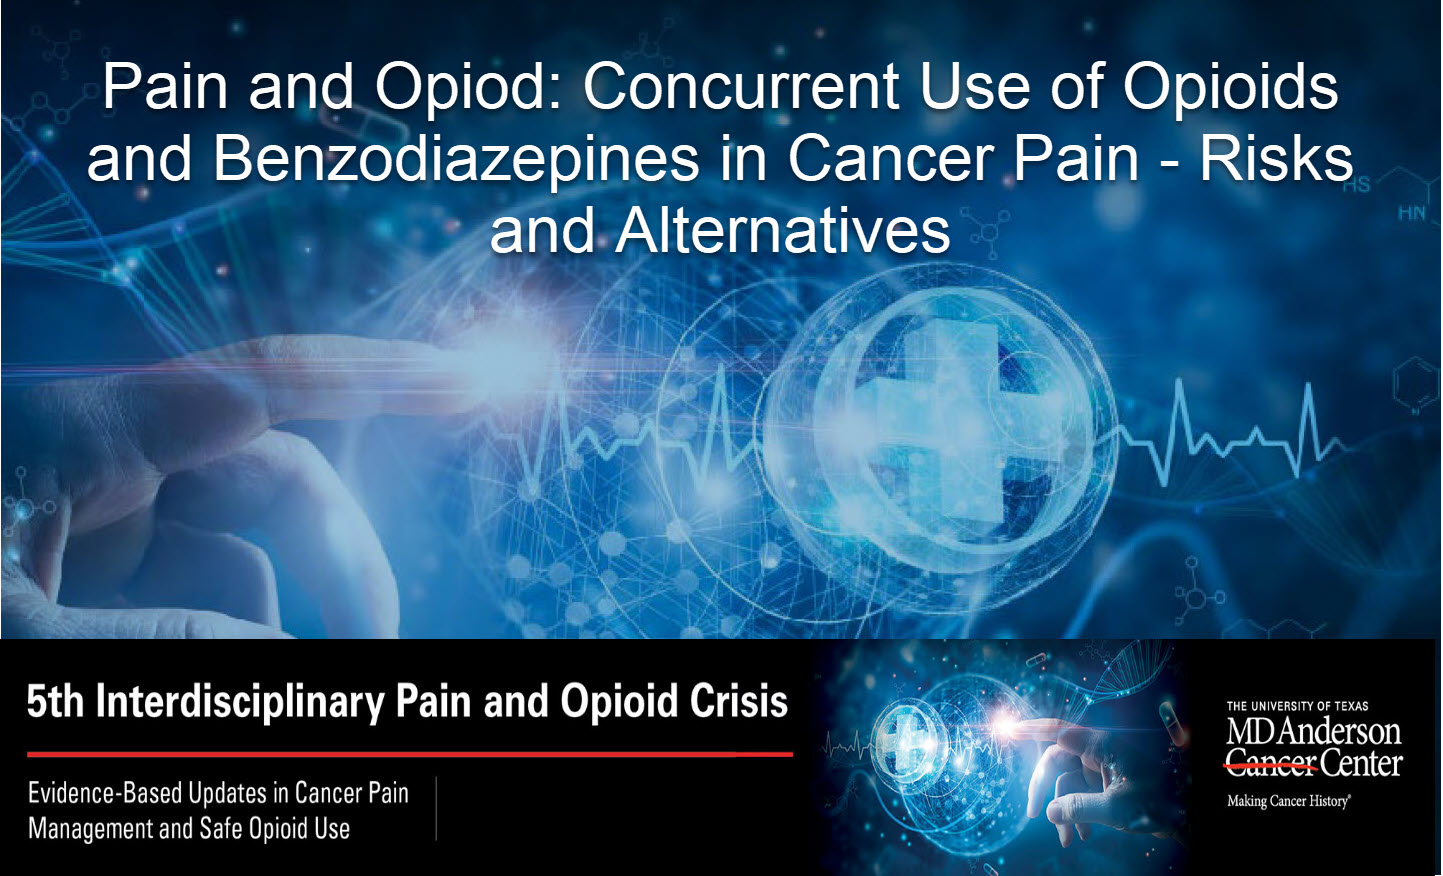 Concurrent Use of Opioids and Benzodiazepines in Cancer Pain - Risks and Alternatives Banner